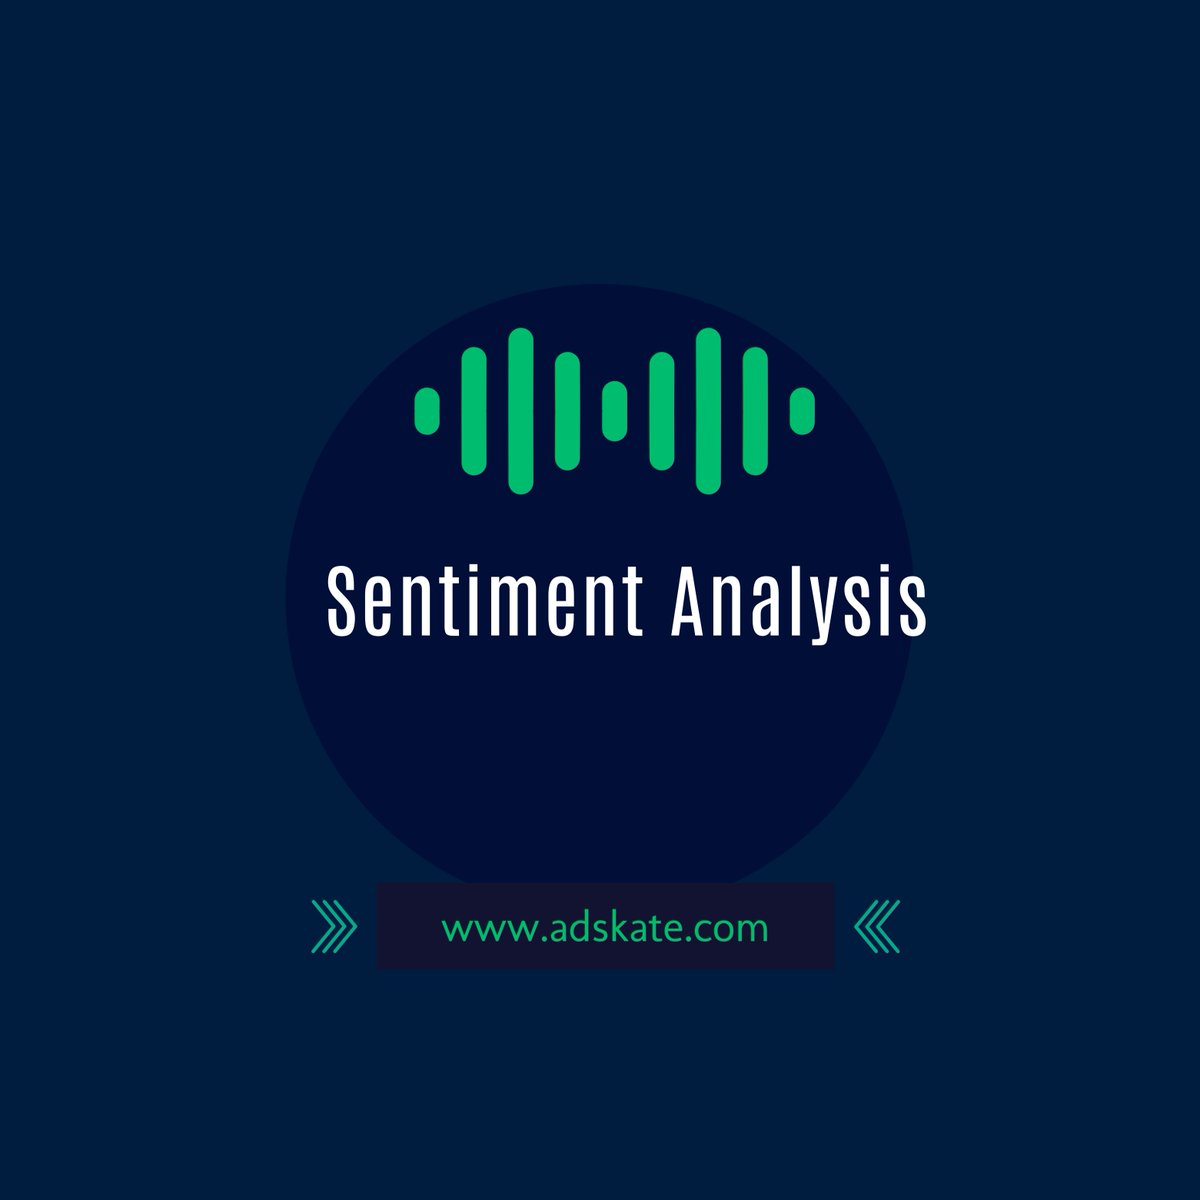 What is Sentiment Analysis? Want to know more
check out adskate.com/terminologies/… to know more #contextualadvertising #cookielessadvertising #programmaticbuying #mediabuying #mediaplanning